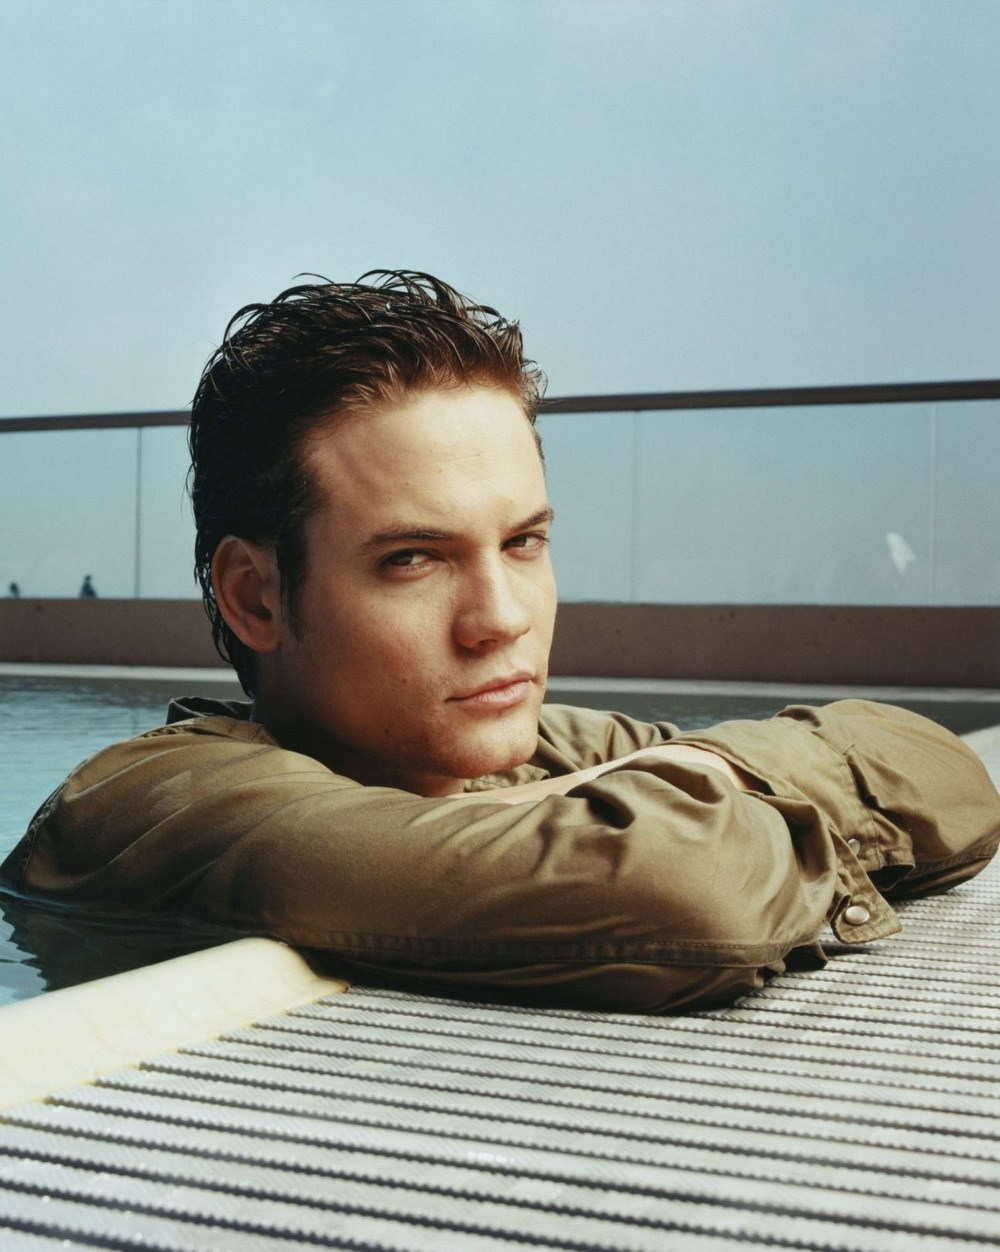 Shane West - Gallery Colection